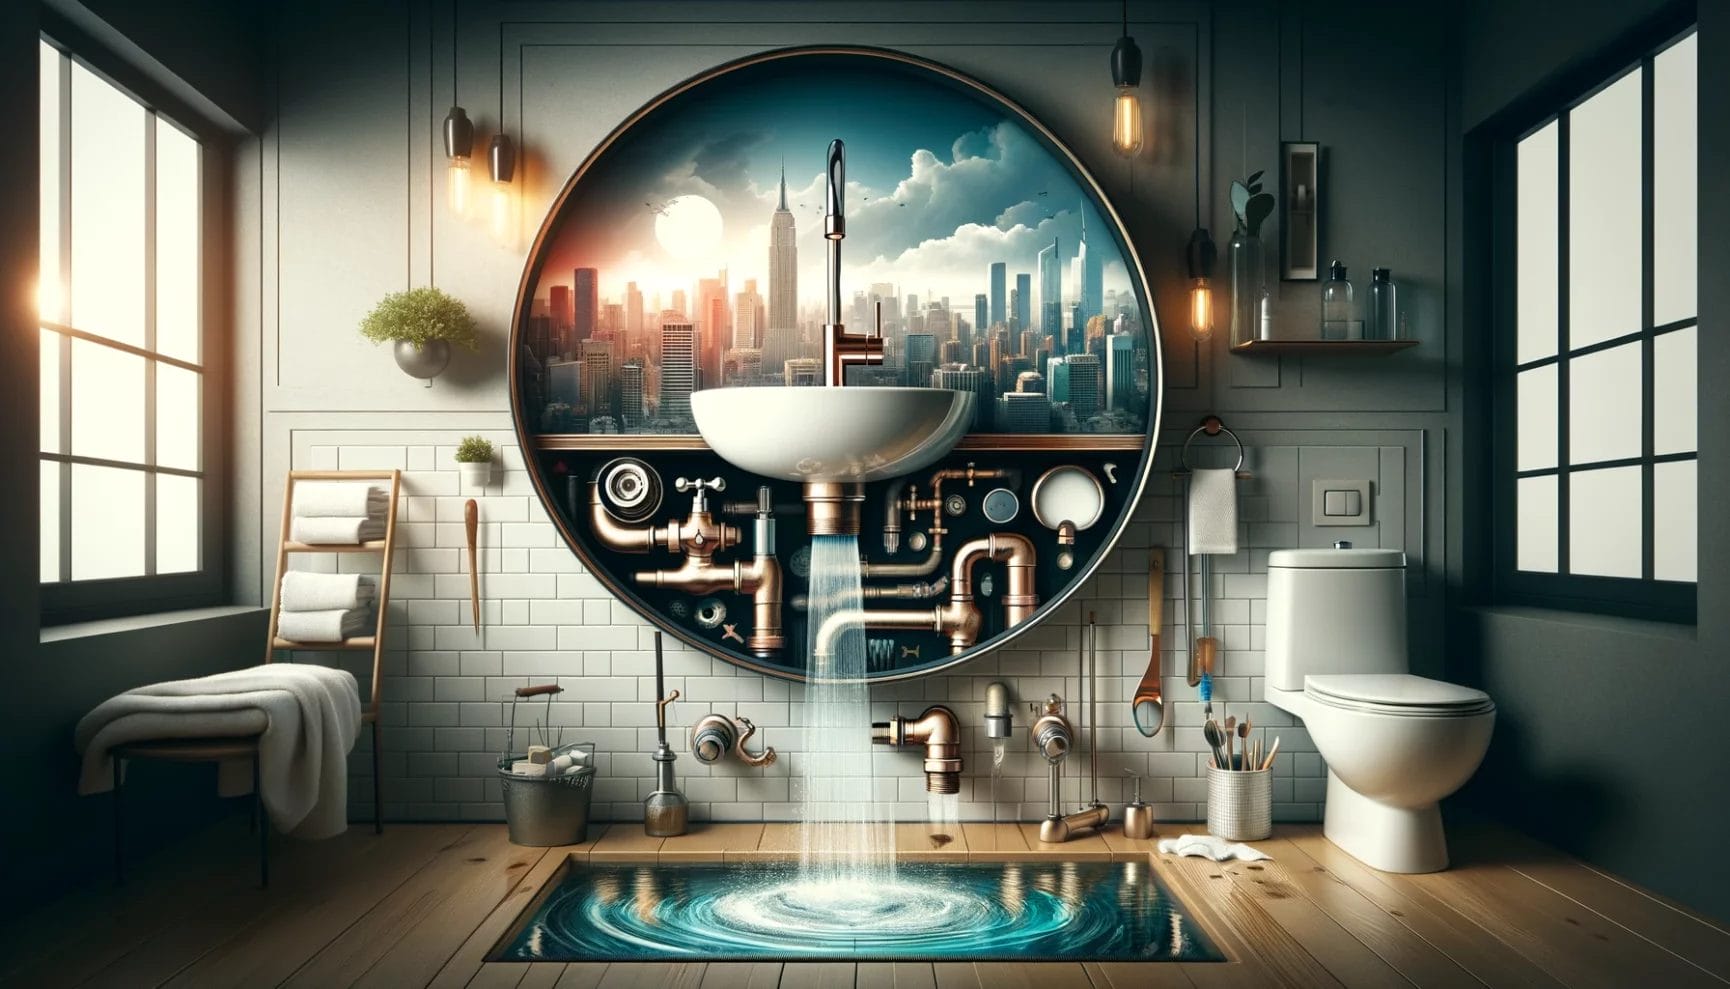 A surreal bathroom with a large mirror reflecting a futuristic cityscape, intricate pipe designs below the sink, and a water vortex on the floor.